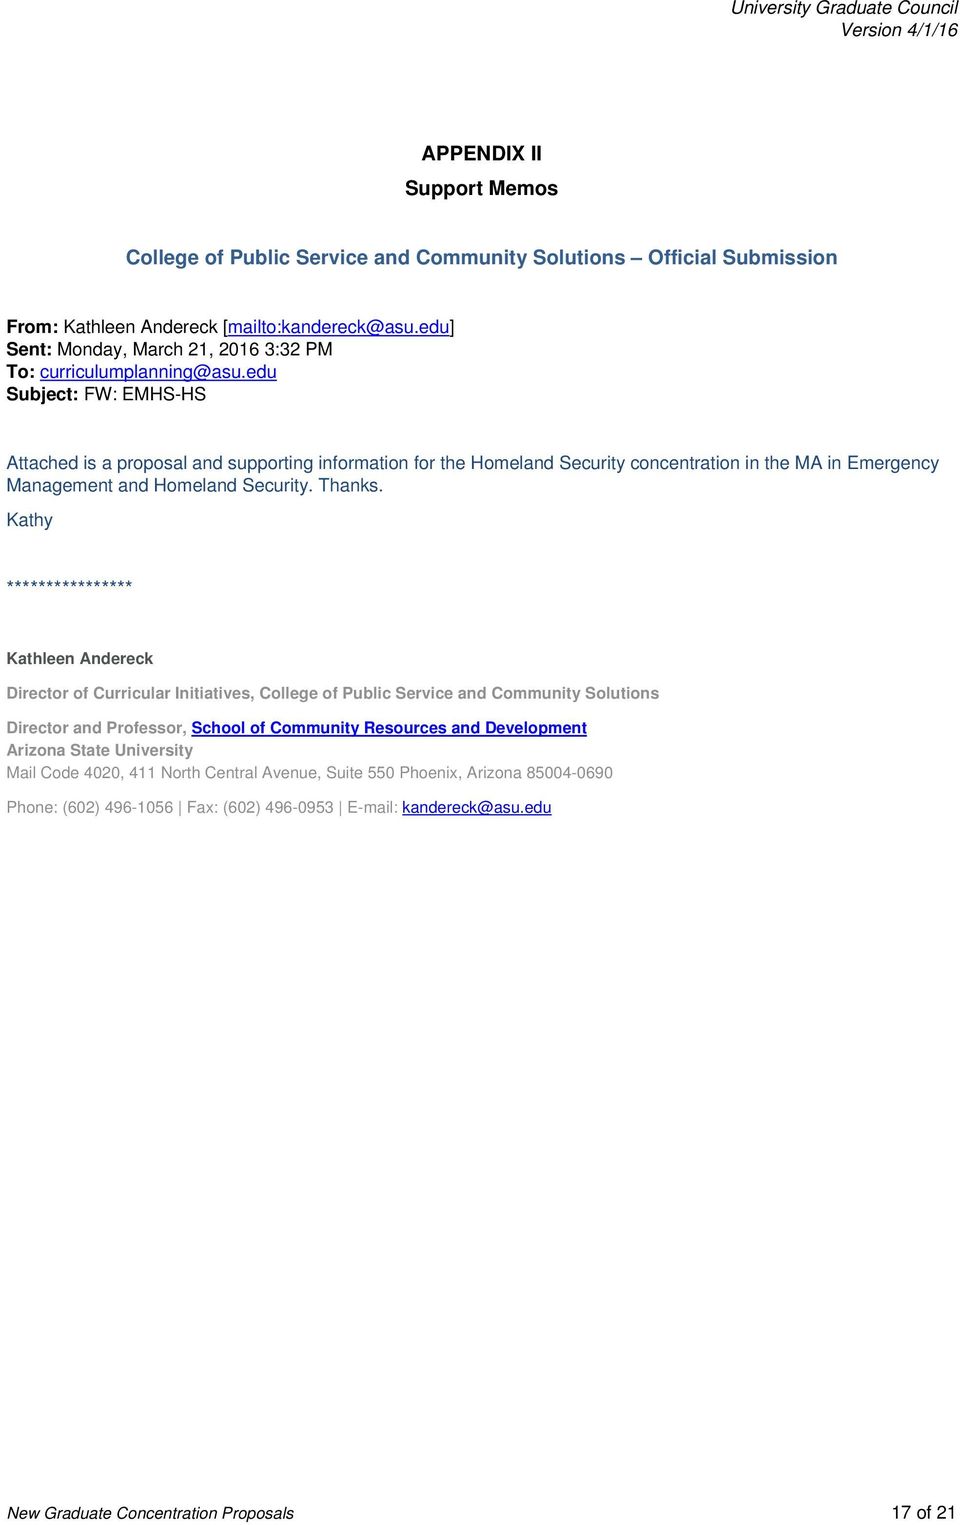 edu Subject: FW: EMHS-HS Attached is a proposal and supporting information for the Homeland Security concentration in the MA in Emergency Management and Homeland Security. Thanks.